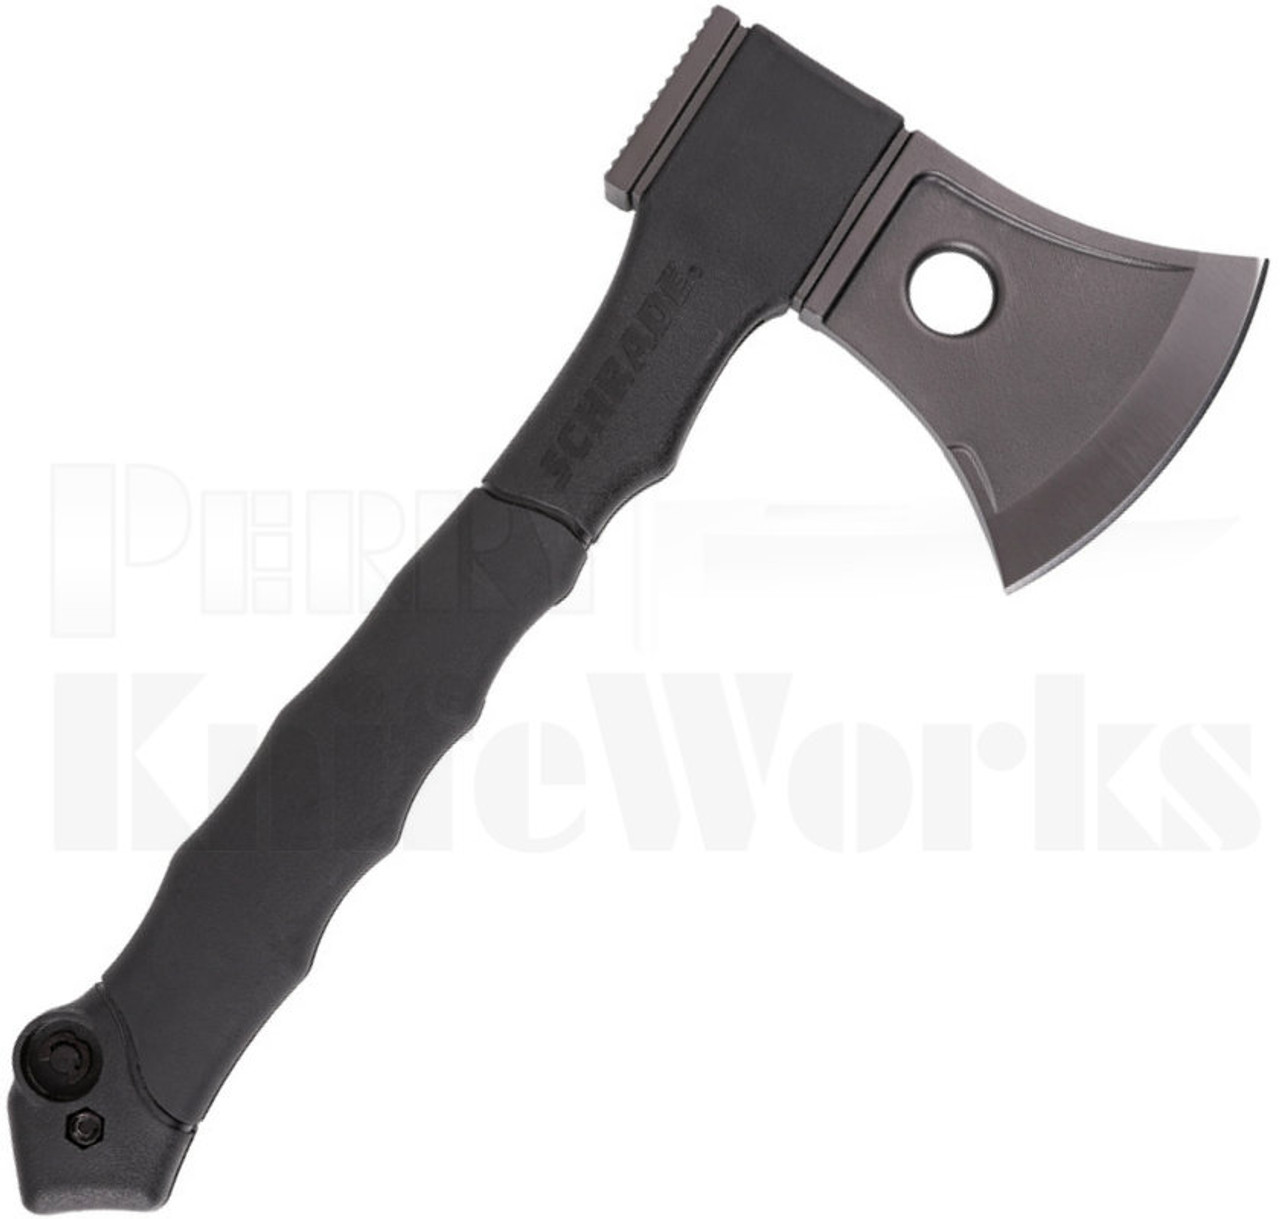 Schrade 1100052 Mini Axe-saw Combo 12.0 in Overall Length for sale online 